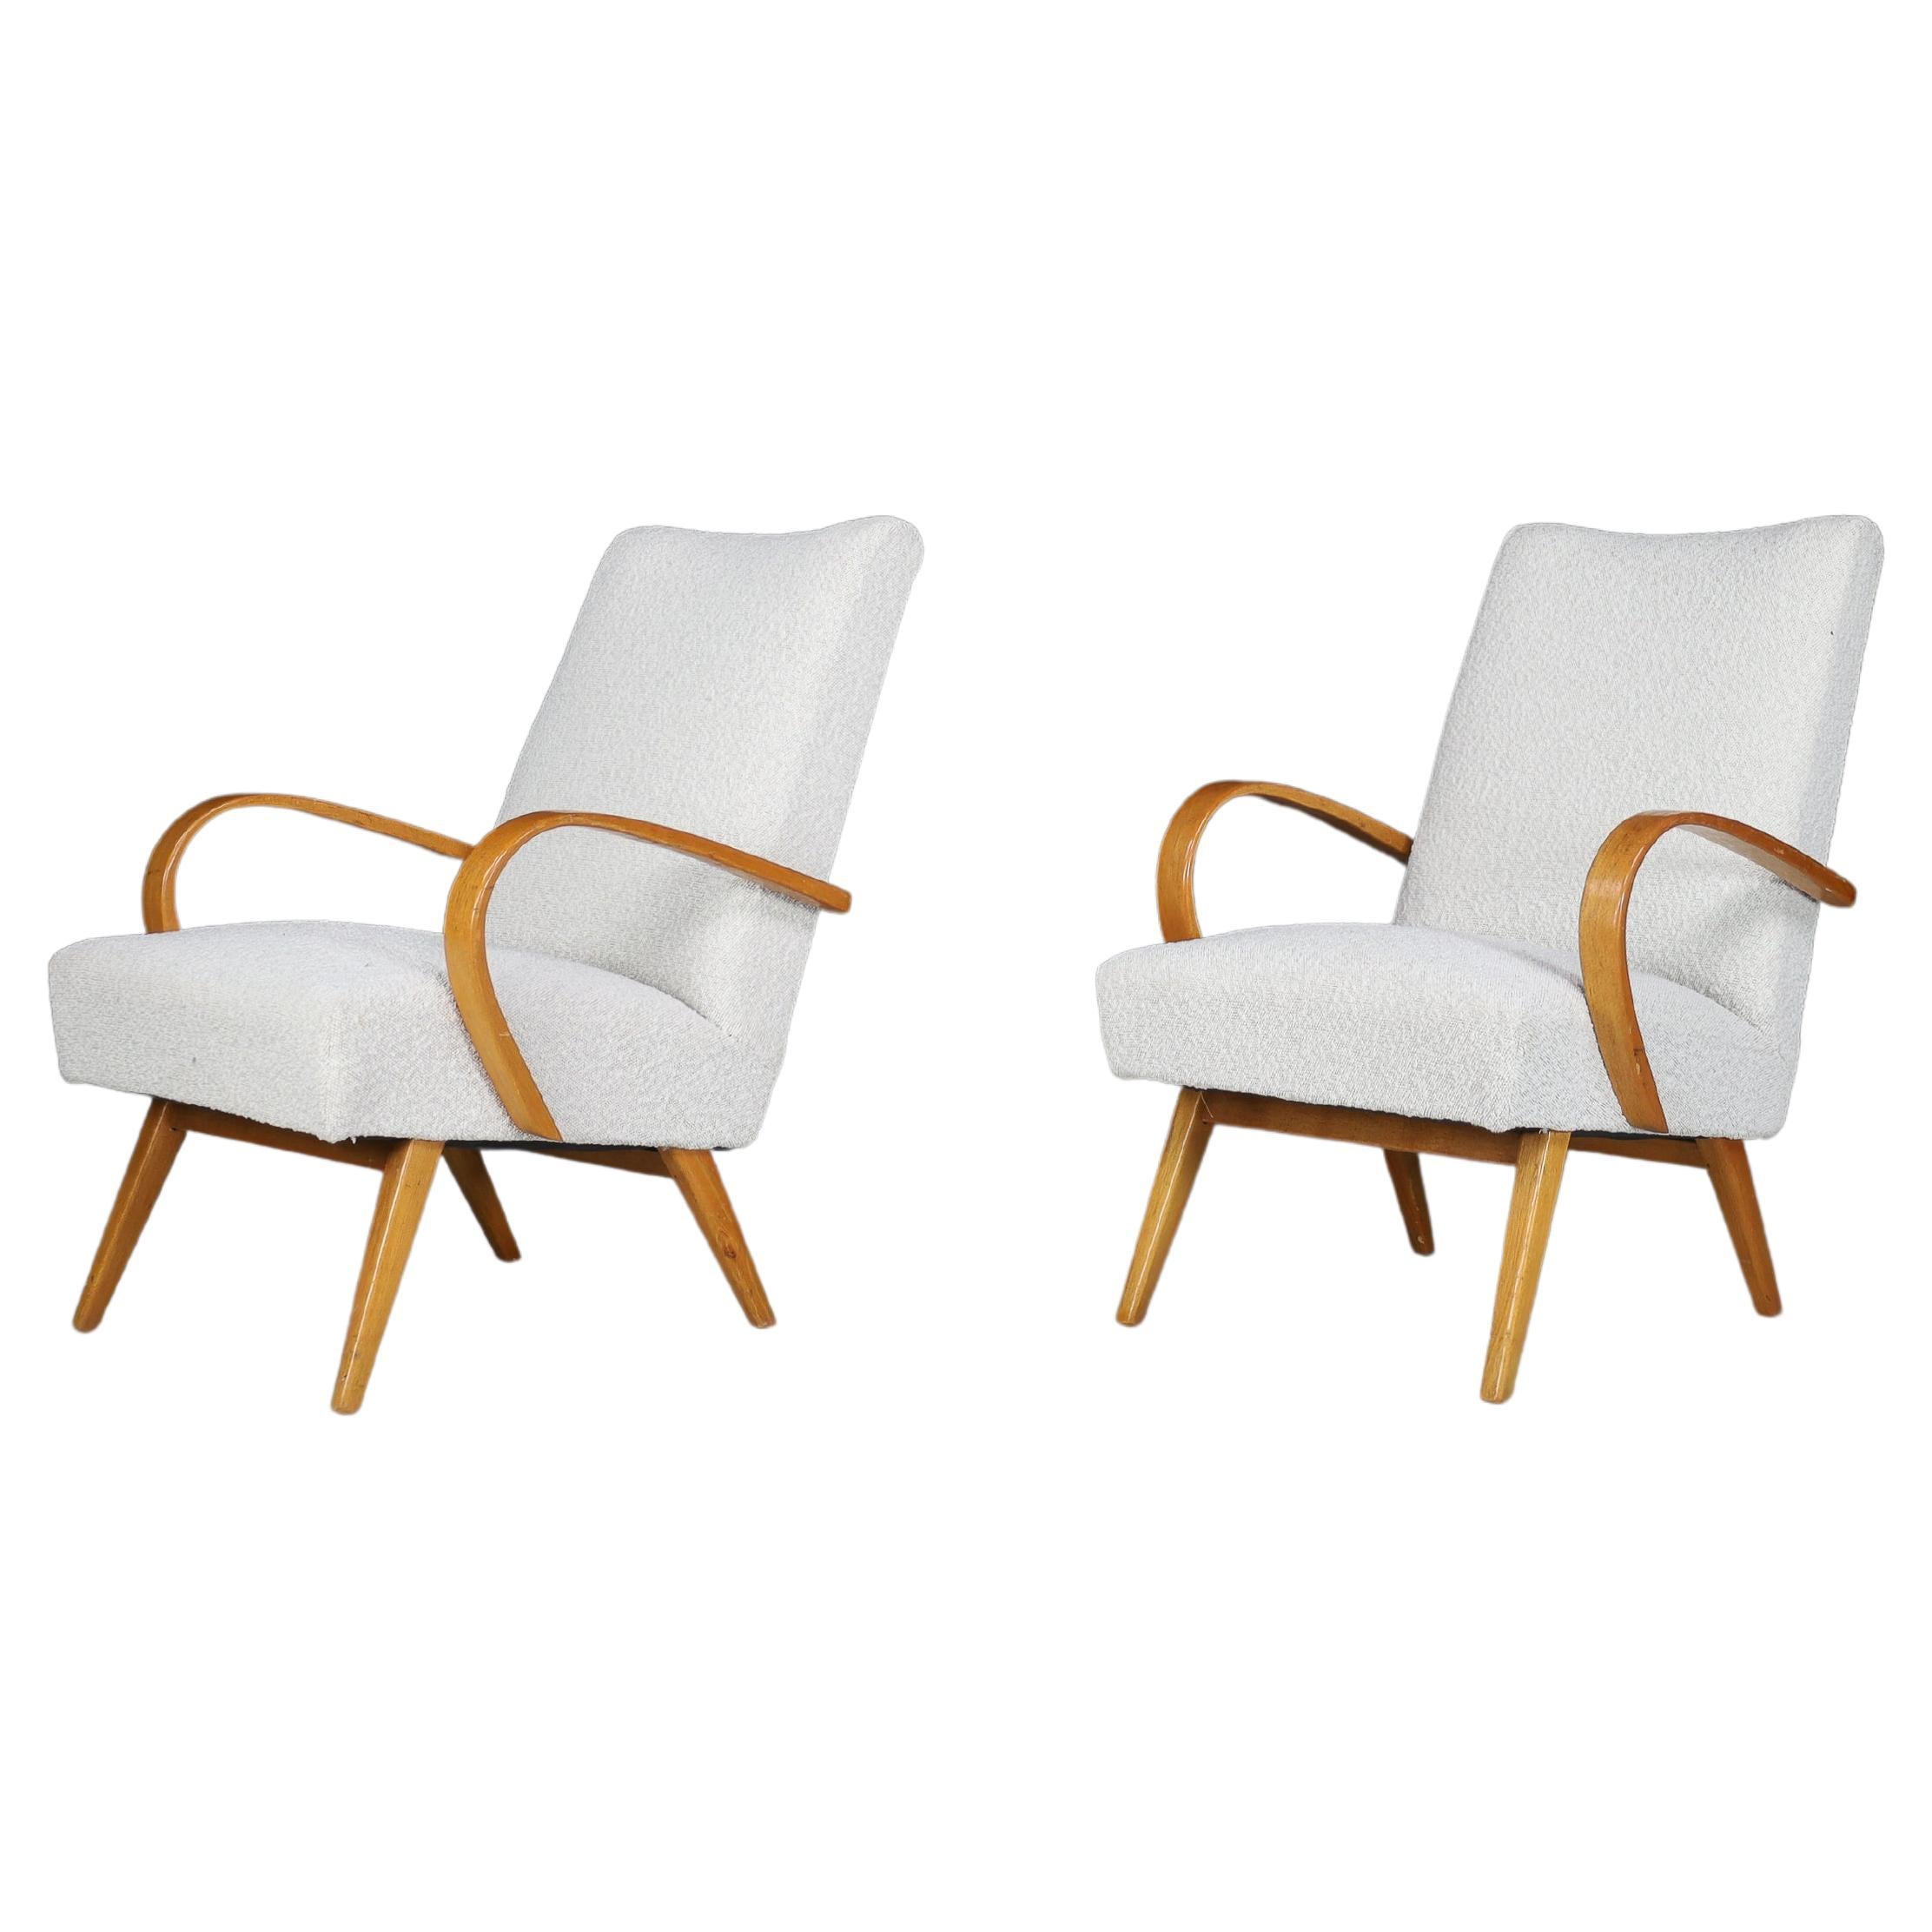 Blond Bentwood Armchairs Manufactured and Designed in Praque, 1950s For Sale